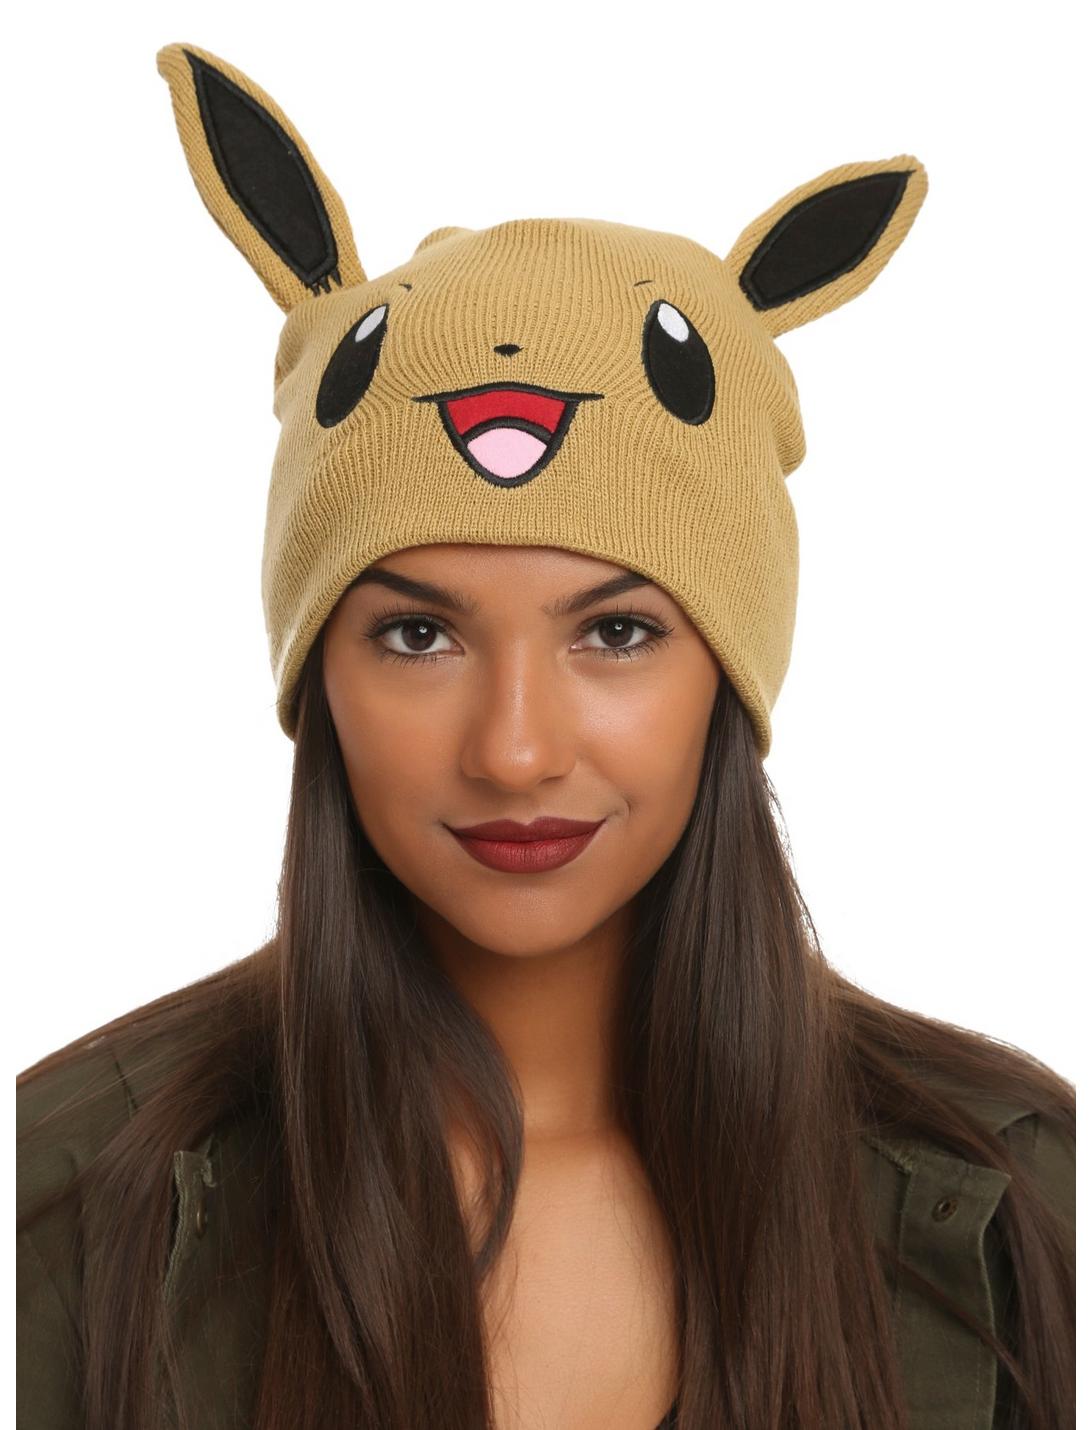 BRAND NEW OFFICIAL POKEMON EEVEE BIG FACE WITH EARS BEANIE HAT